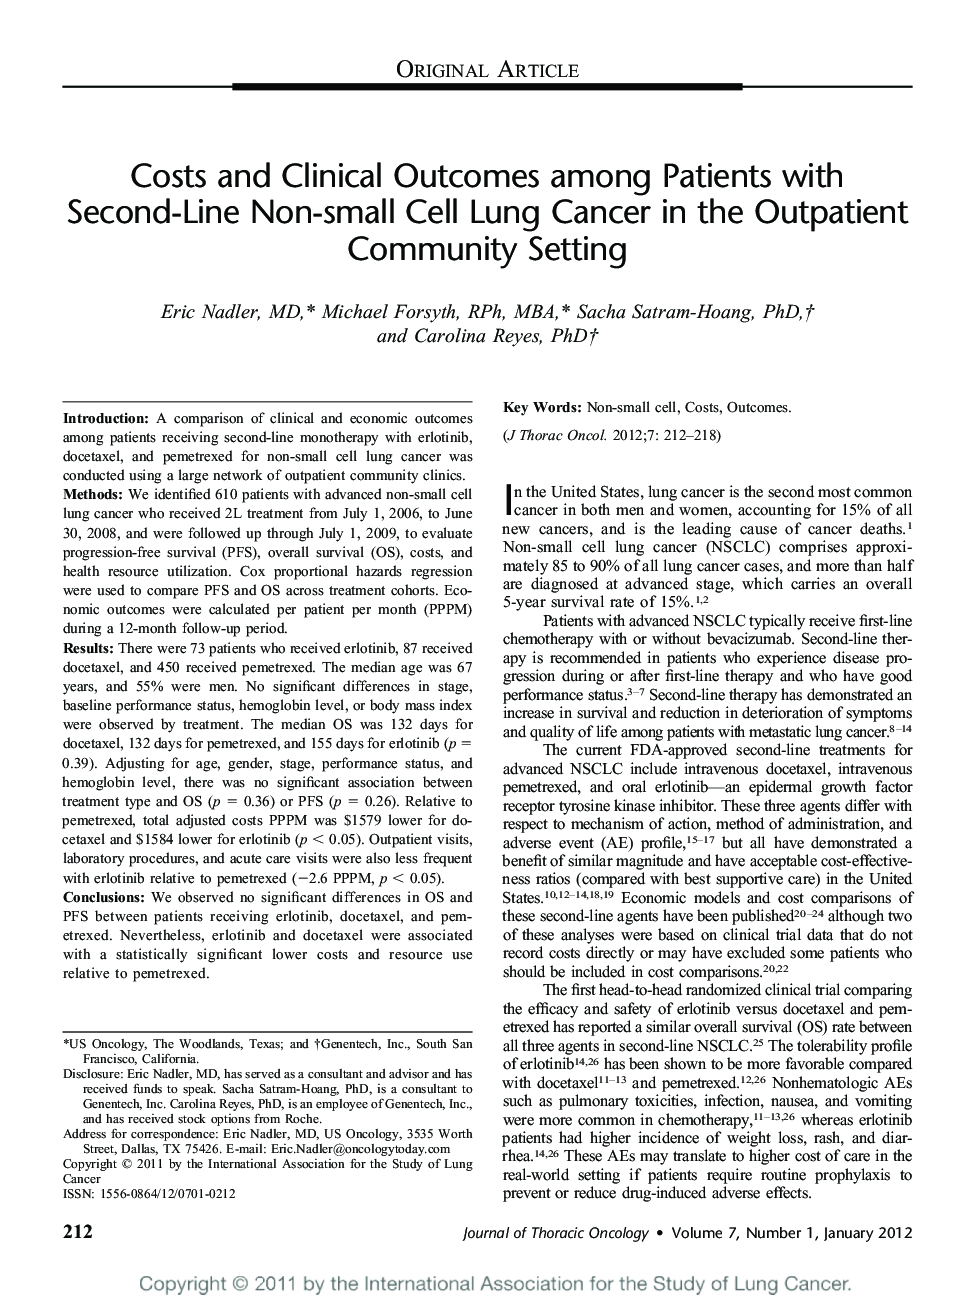 Costs and Clinical Outcomes among Patients with Second-Line Non-small Cell Lung Cancer in the Outpatient Community Setting